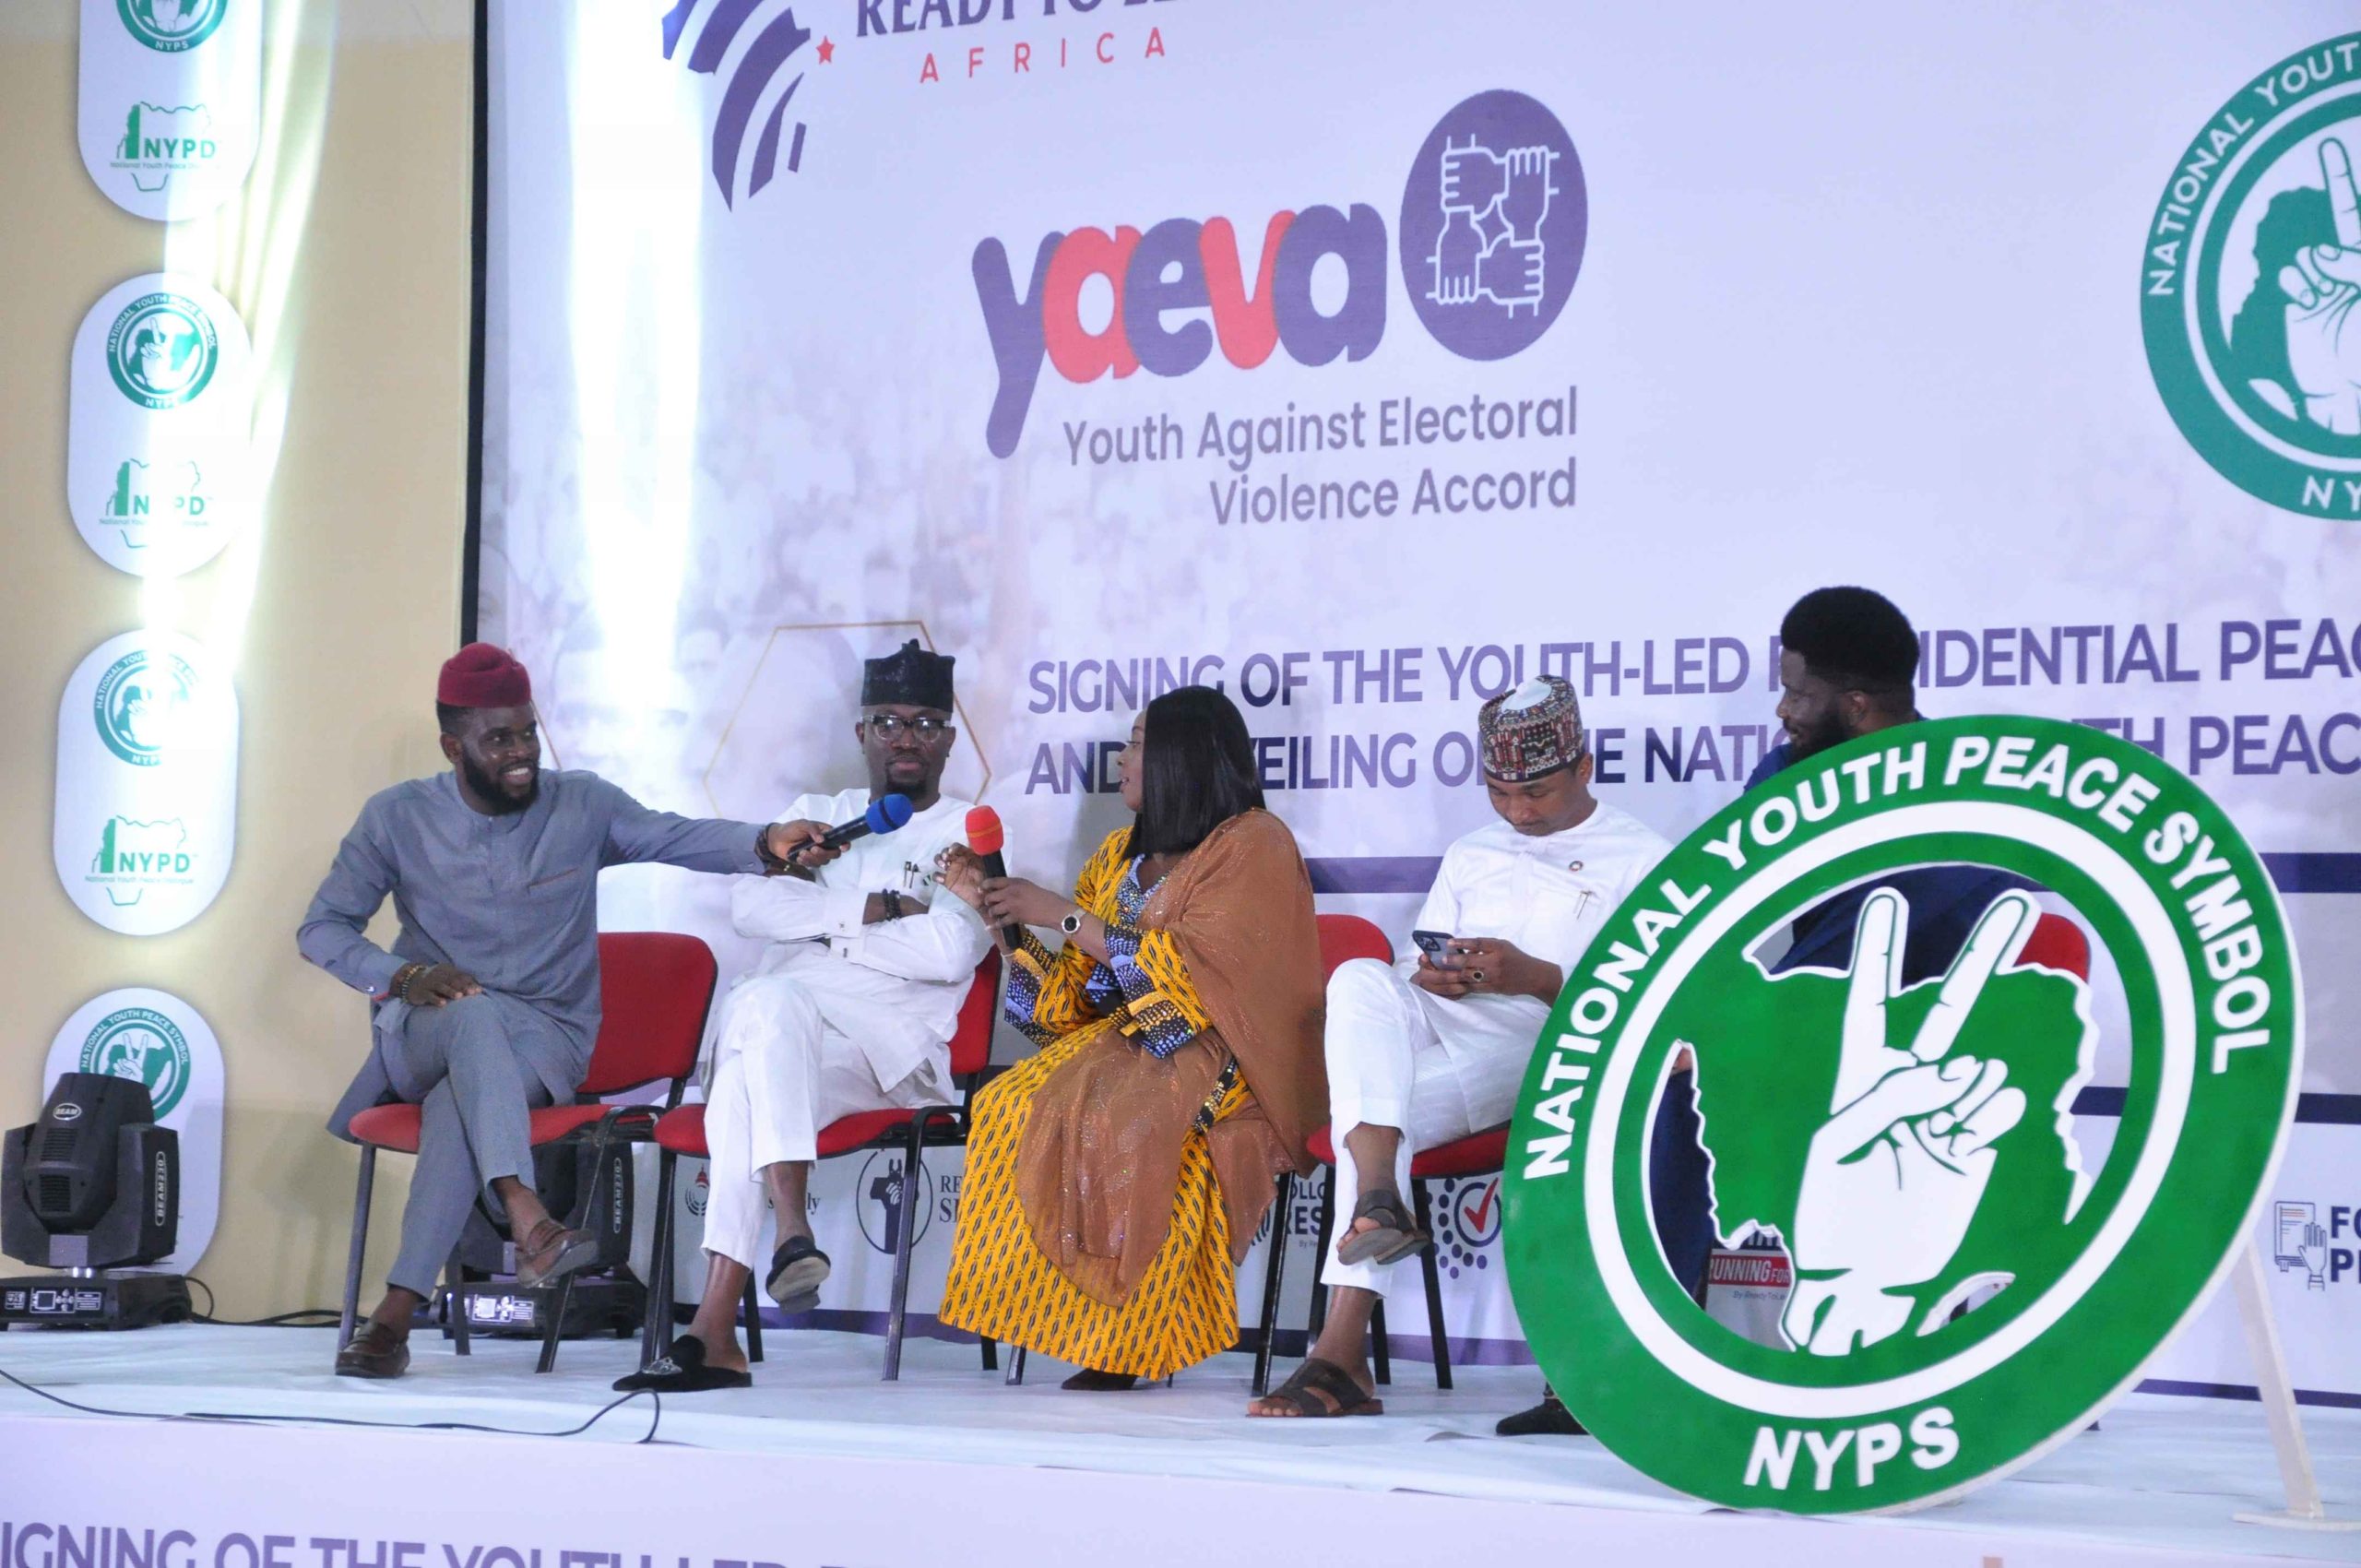 Signing of the Youth Led Peace Accord and Unveiling of the National Youth Peace Symbol - ReadyToLeadAfra (20)